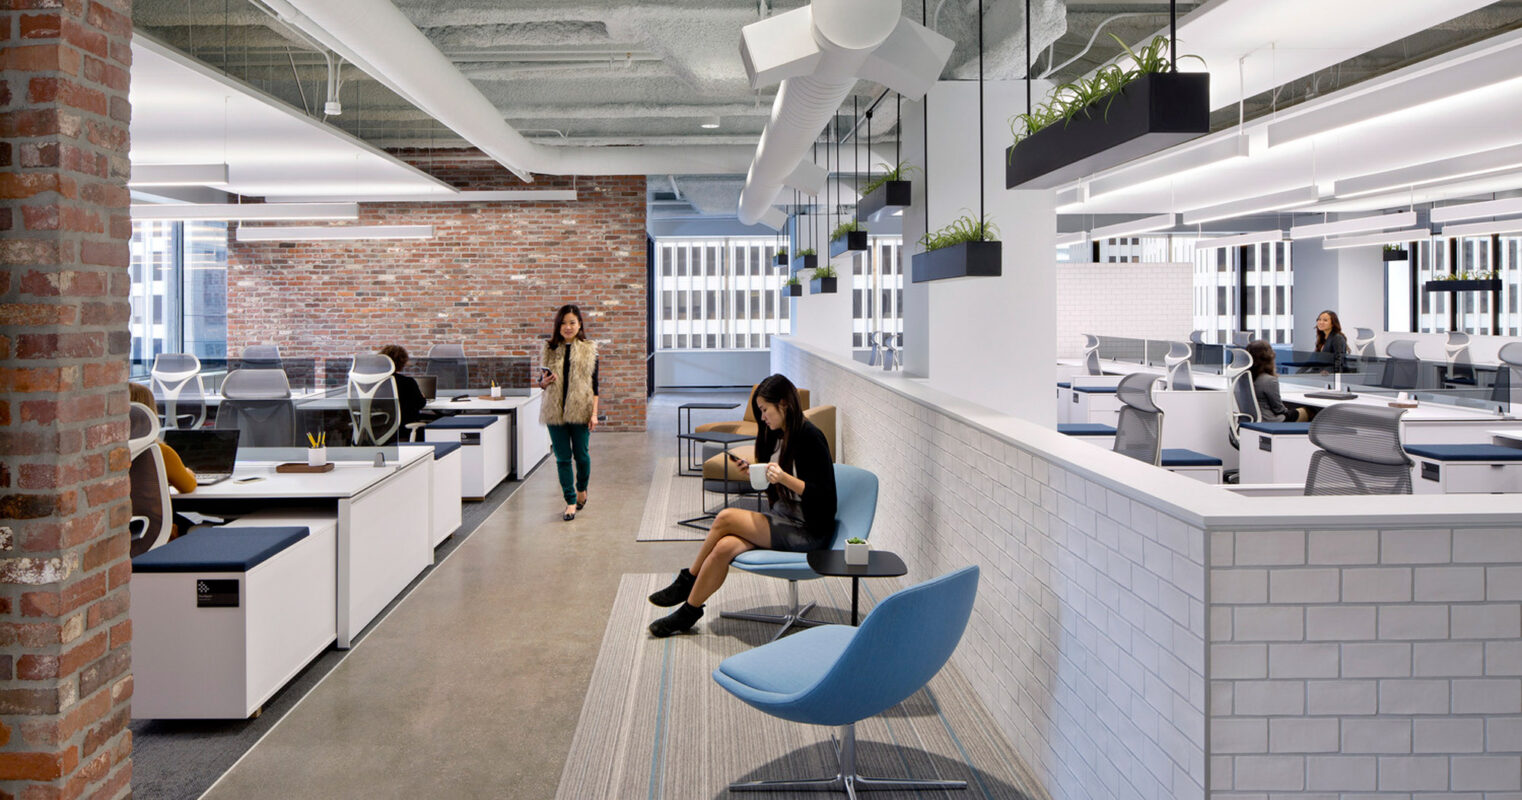 Modern open-plan office with exposed ceiling showcasing ductwork, track lighting, and acoustical baffles. Brick accent walls blend with sleek white workstations and pops of blue in seating. Occupants navigate the space, underscoring the functional design.